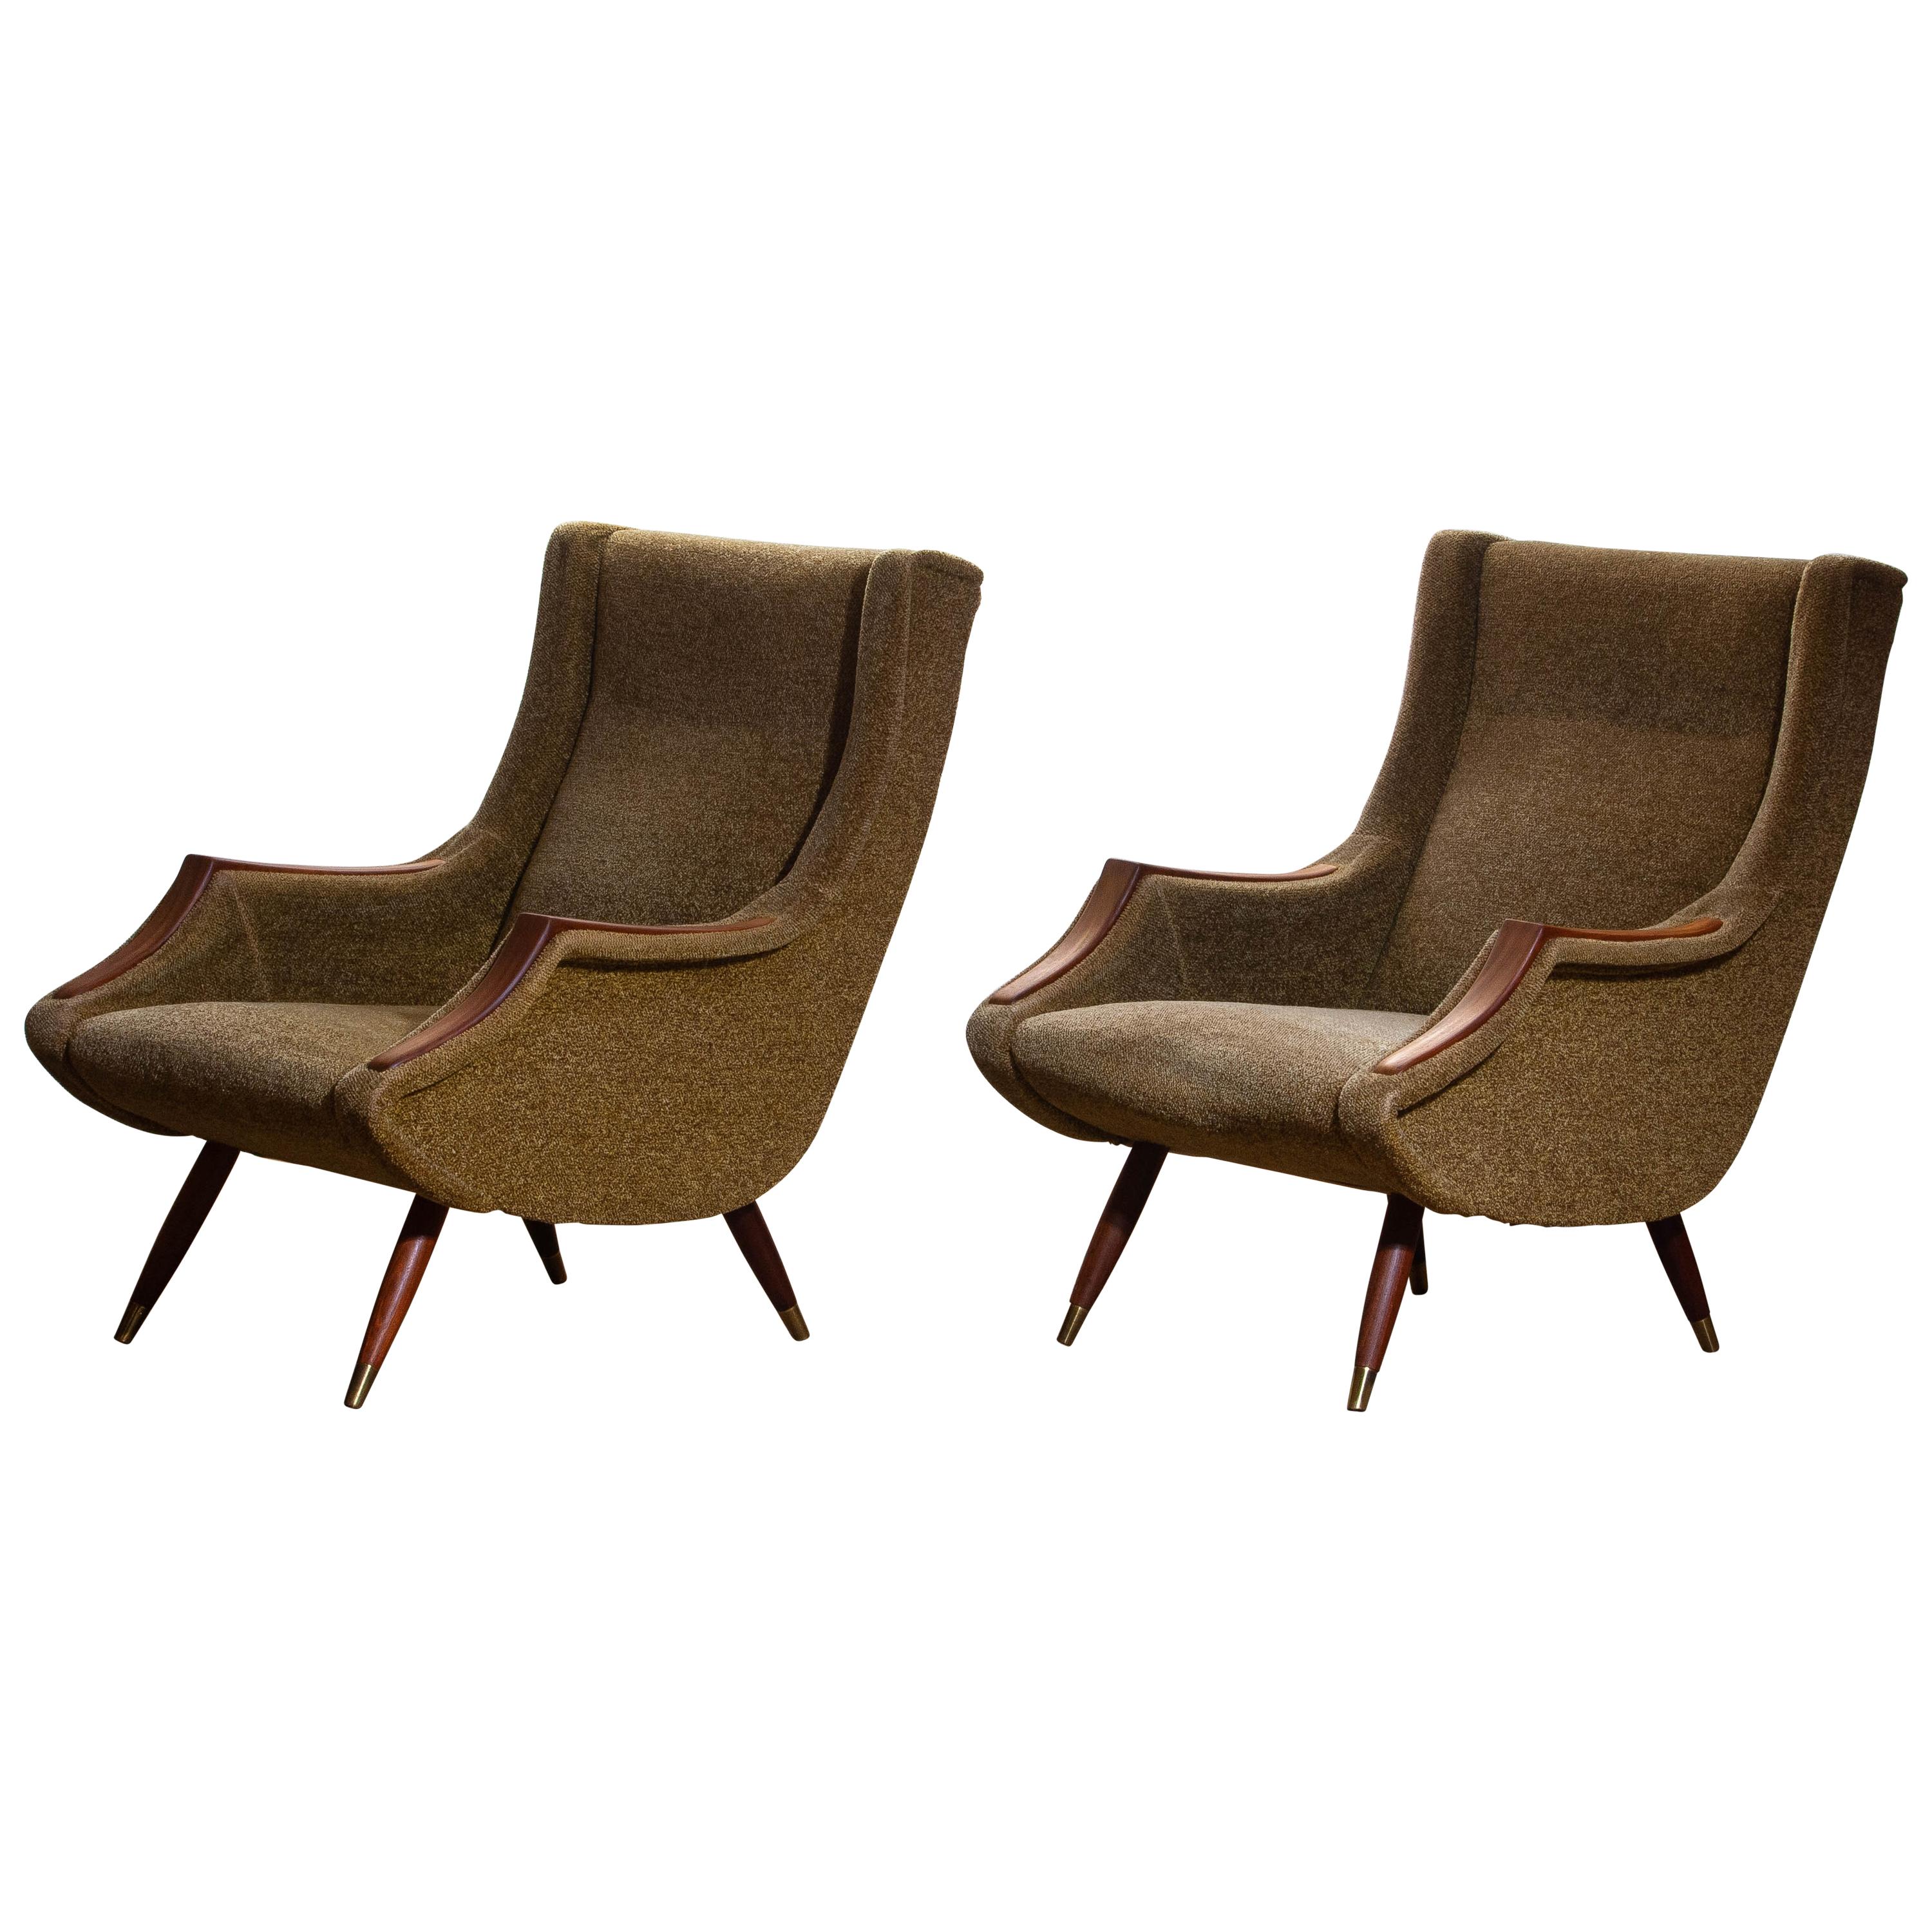 1950s extremely rare pair easy / lounge chairs designed by Aldo Morbelli for Isa Bergamo, Italy, both still in original condition.
Armrests and legs in teak.
Overall impression for the age is good.
One chair shows slide discoloration to one side.